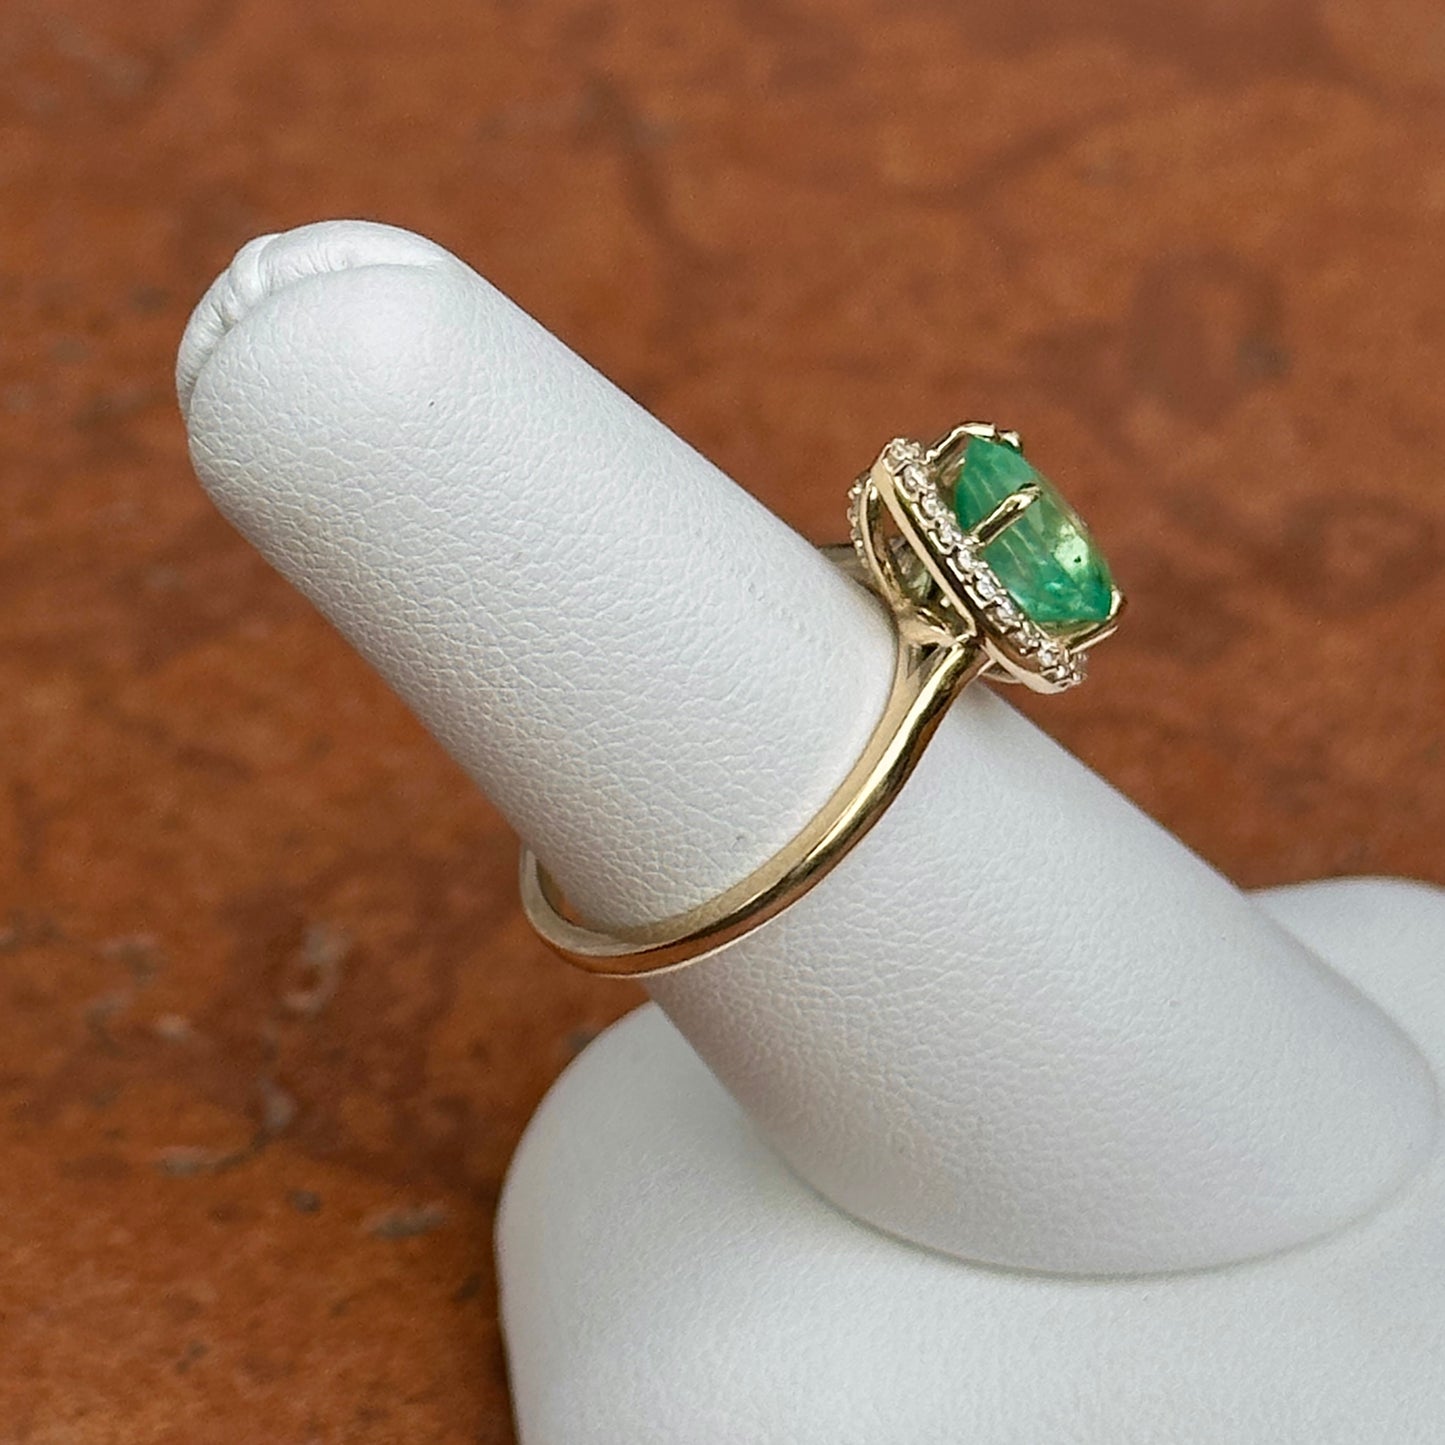 14KT Yellow Gold Pear Colombian Emerald + Halo Diamond Ring